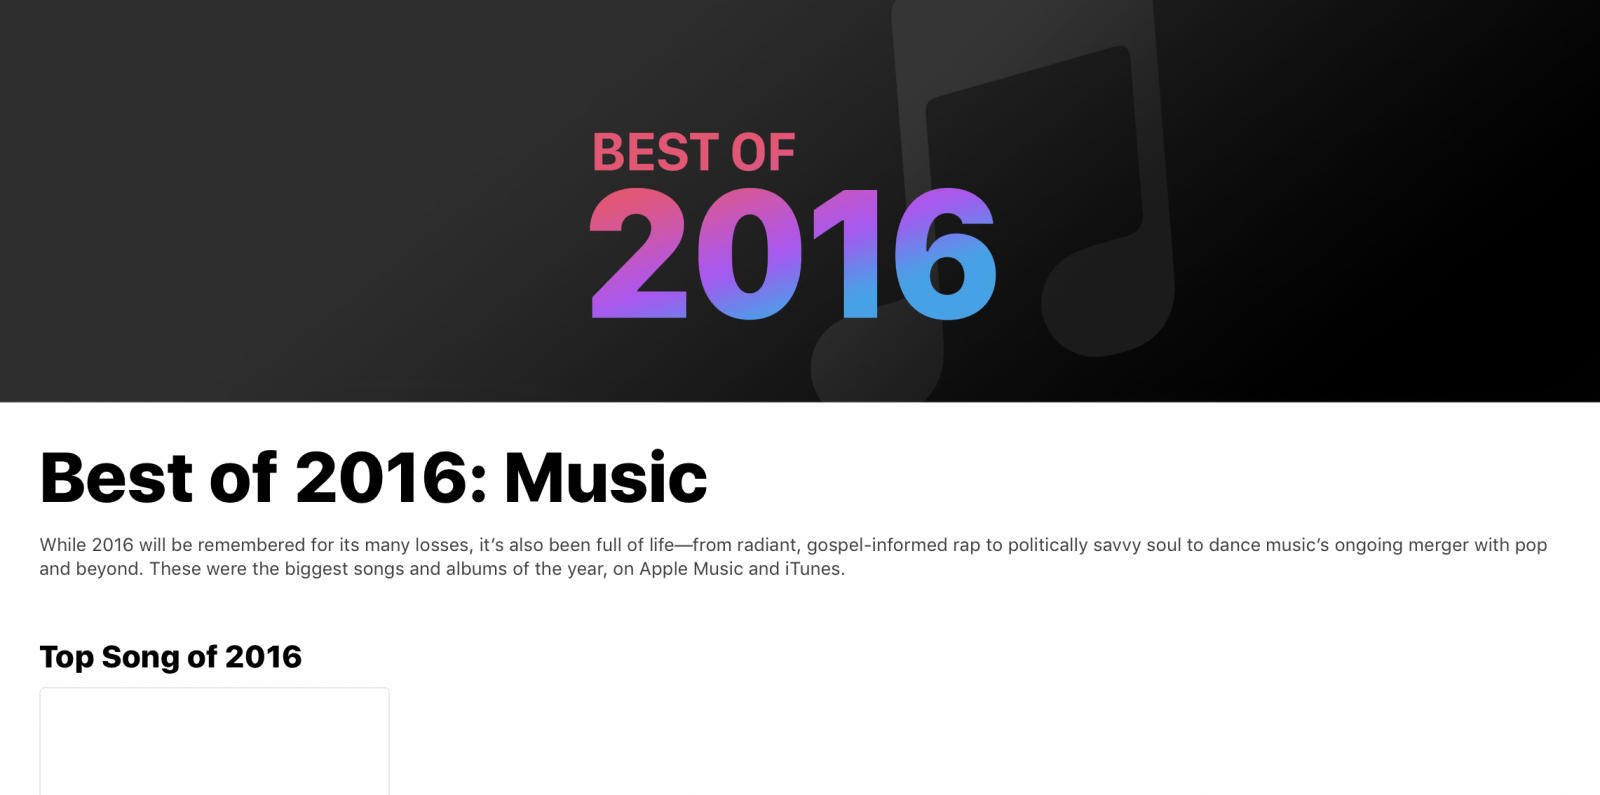 Apple releases annual ‘Best of’ lists highlighting top apps, movies, music, TV, and more of 2016